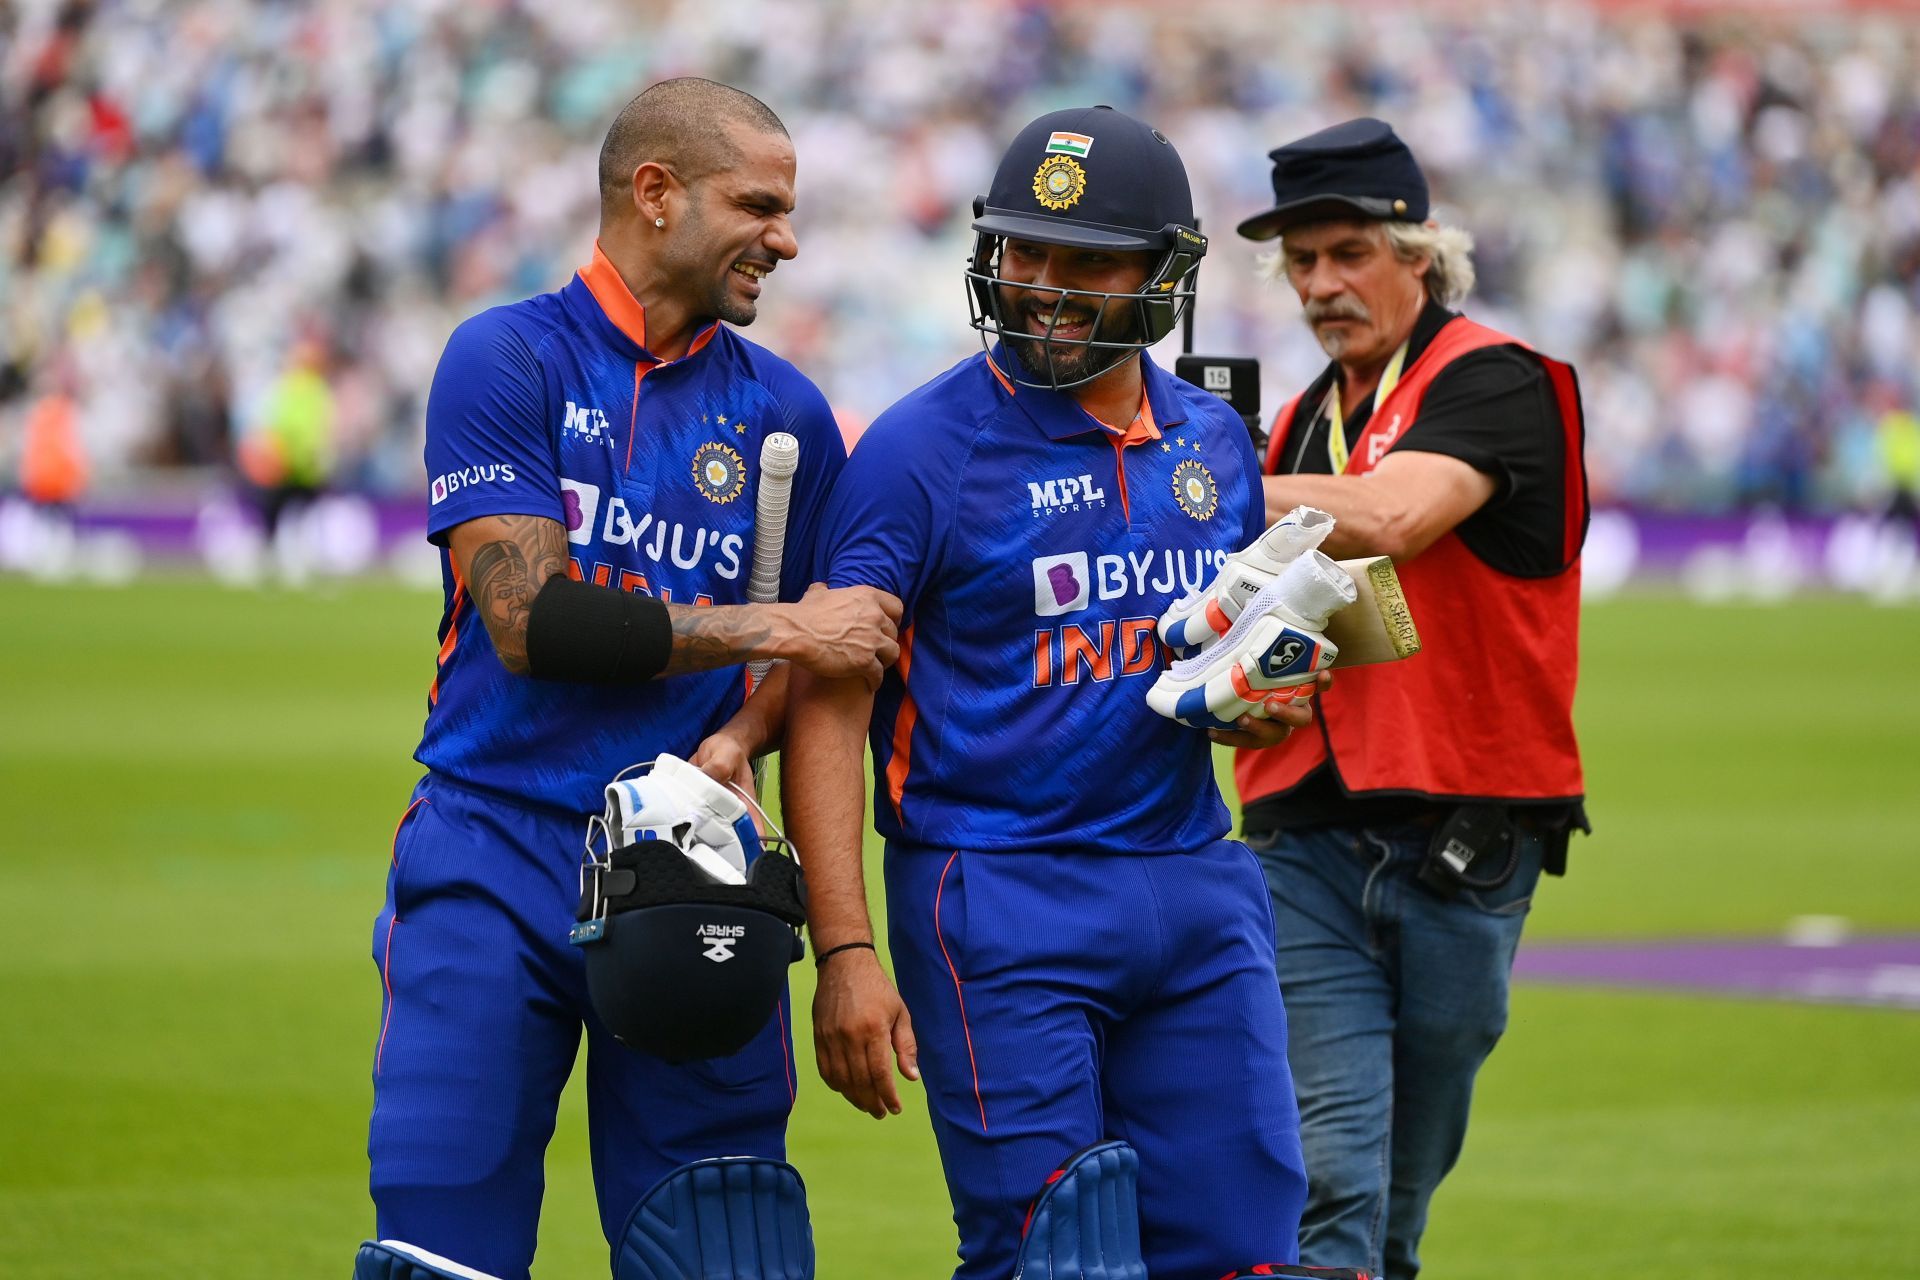 Shikhar Dhawan and Rohit Sharma stitched together an unbroken 114-run partnership in the first ODI